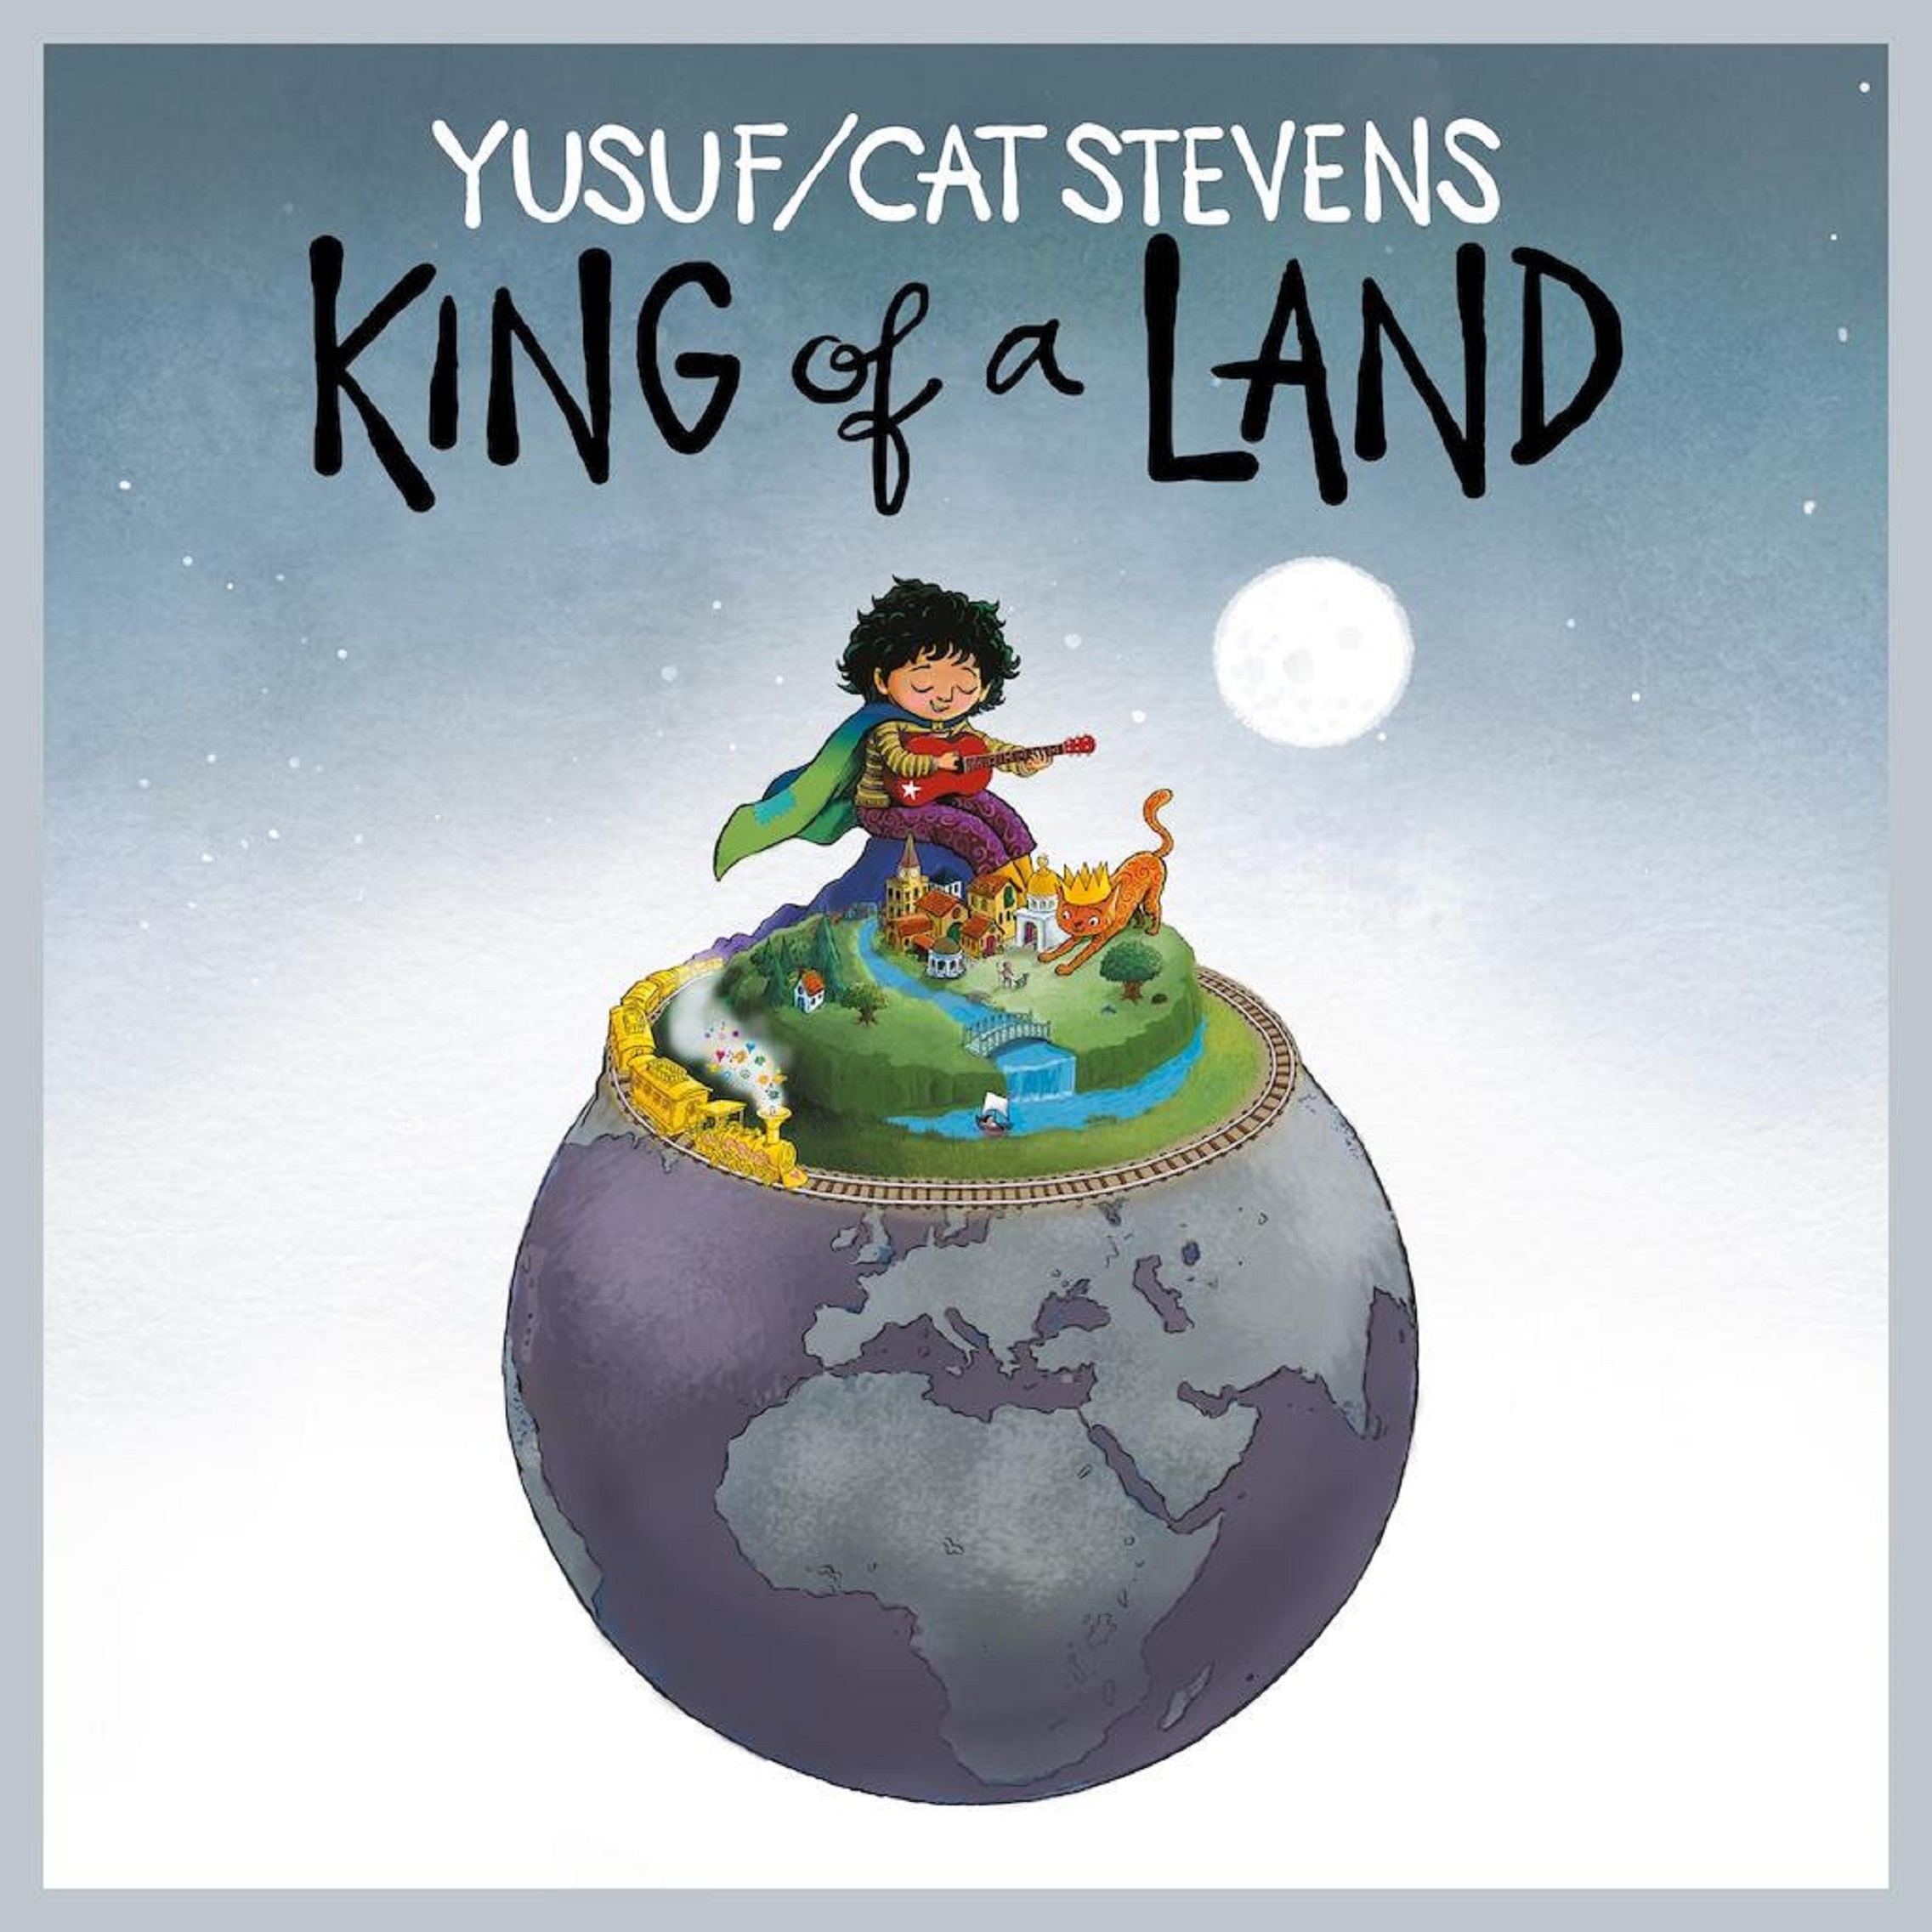 Yusuf / Cat Stevens Shares New Single "All Days, All Nights" from Forthcoming Album